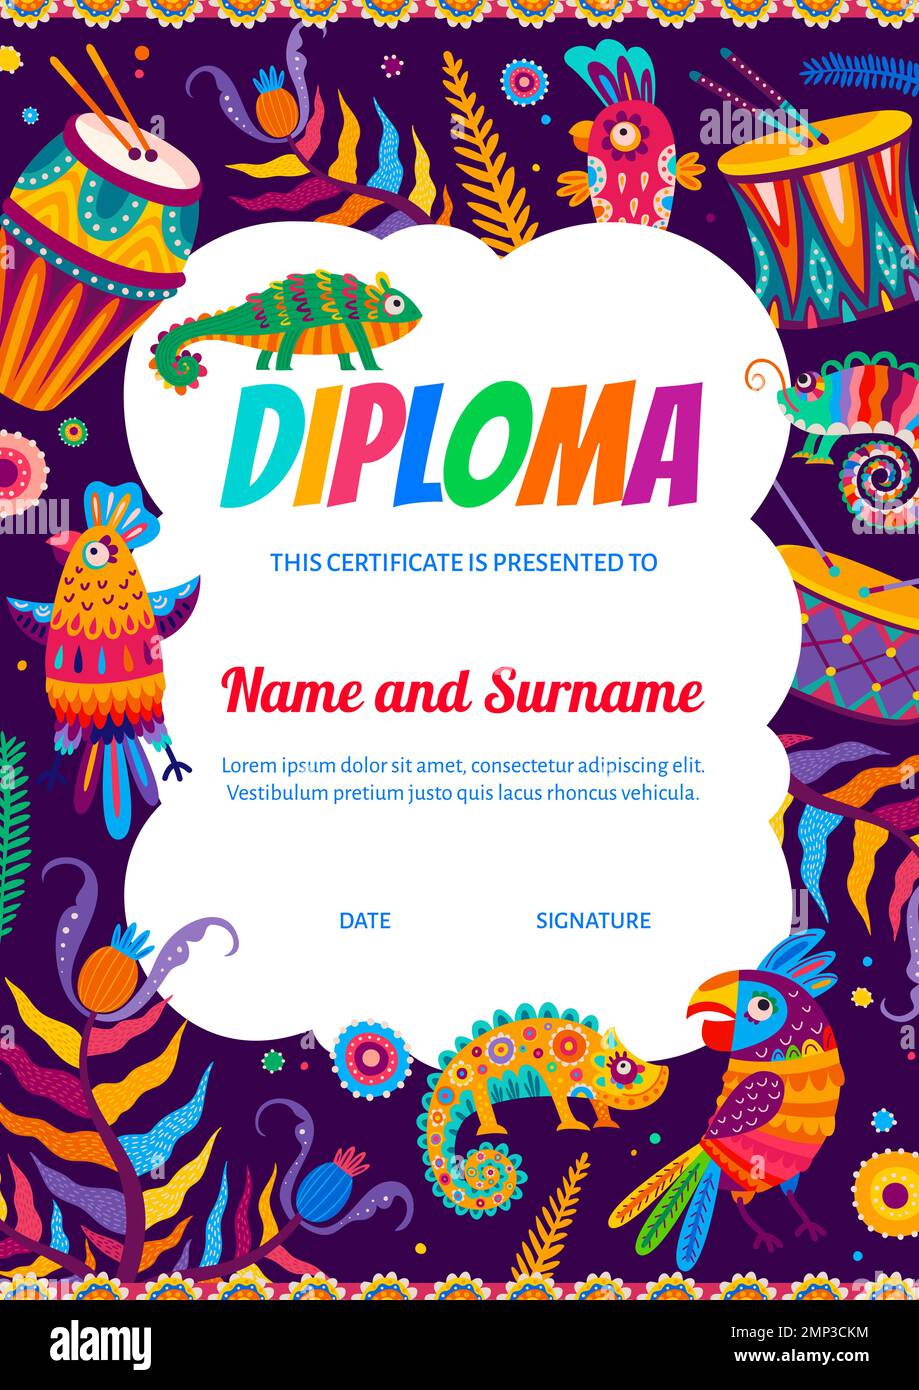 Kids diploma with brazilian drums and parrots, mexican chameleons. Educational vector certificate with animals and musical instruments. Appreciation, graduation or gift frame in alebrije style Stock Vector